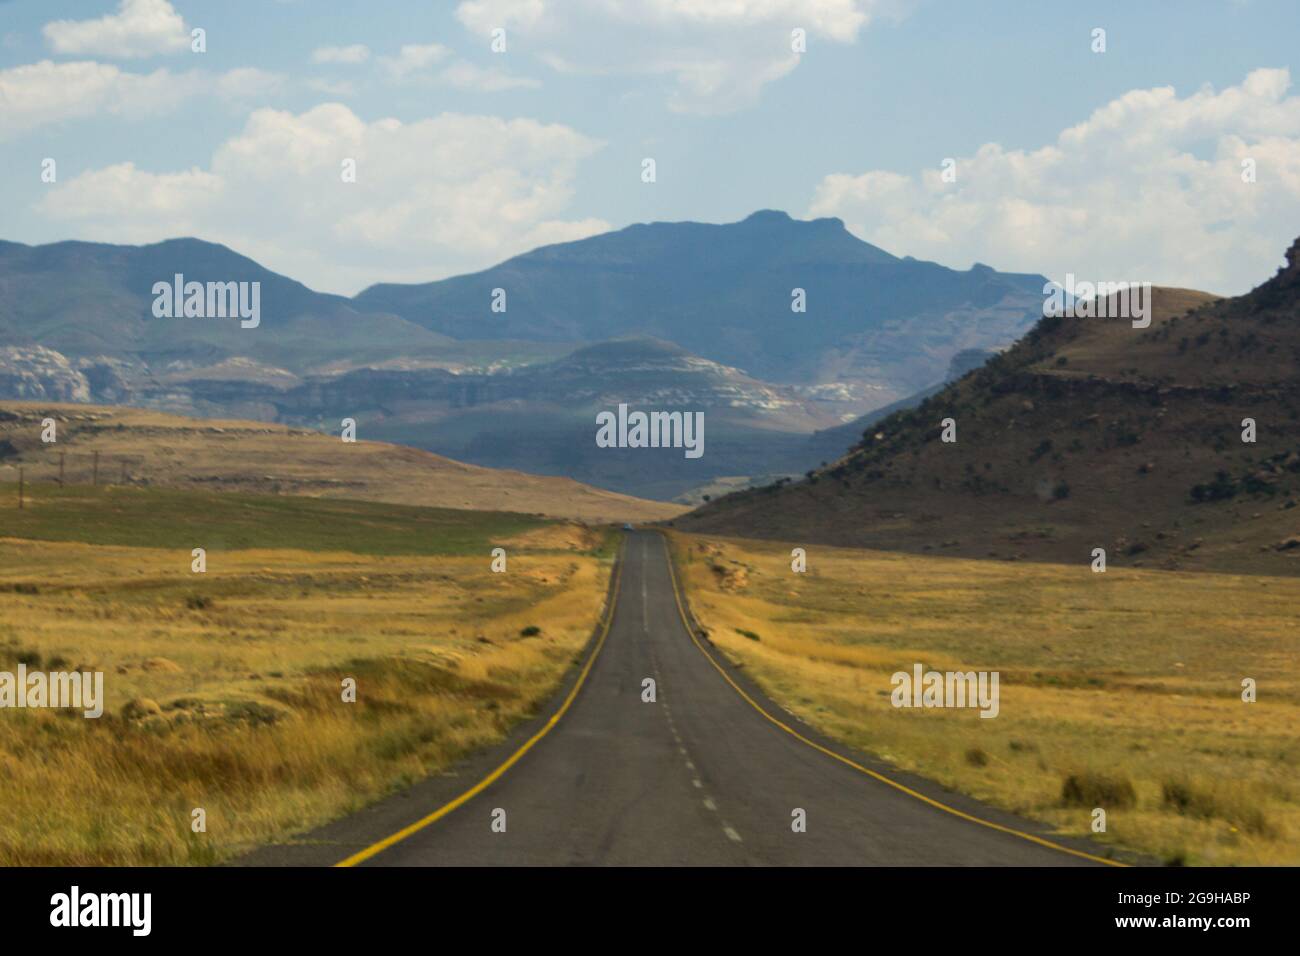 A deserted highway, heading towards the Drakensberg Mountains in South Africa Stock Photo